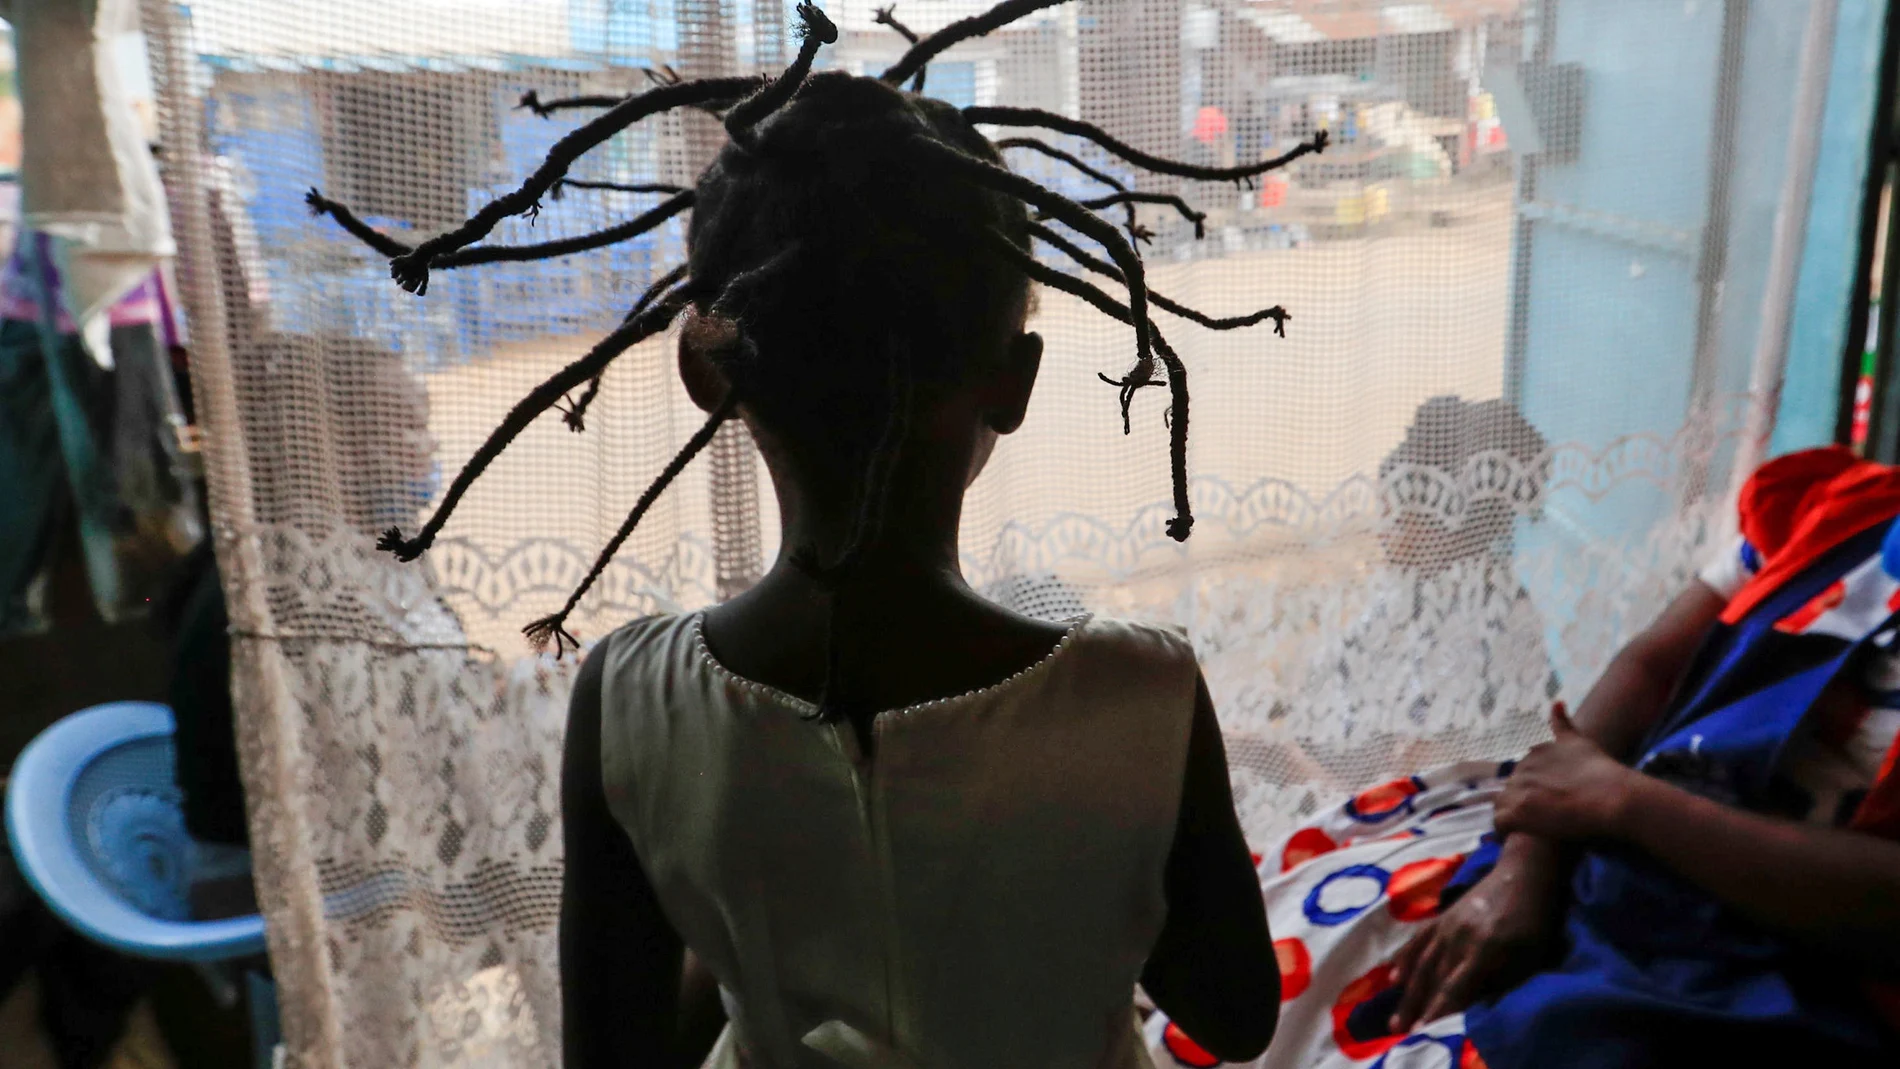 Stacy Ayuma is seen after plaiting with the "coronavirus" hairstyle, as a fashion statement against the spread of the coronavirus disease (COVID-19) in Kibera, Nairobi